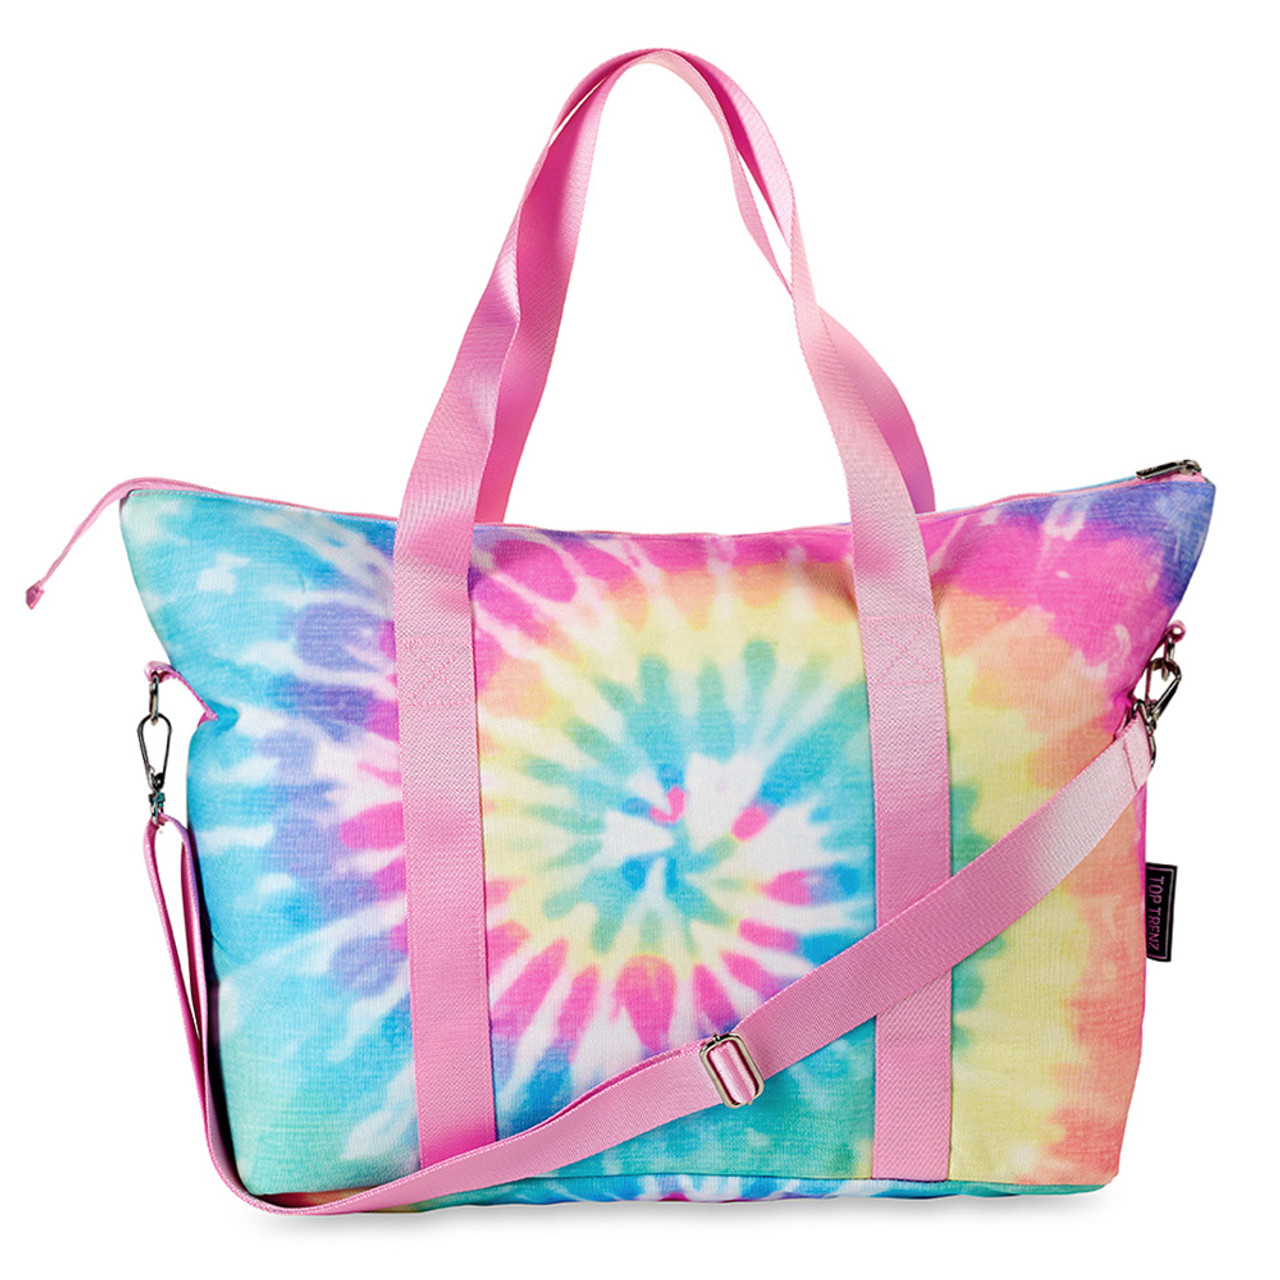 Top trenz canvas material tote bag with a pastel colored tie dye print and pink straps